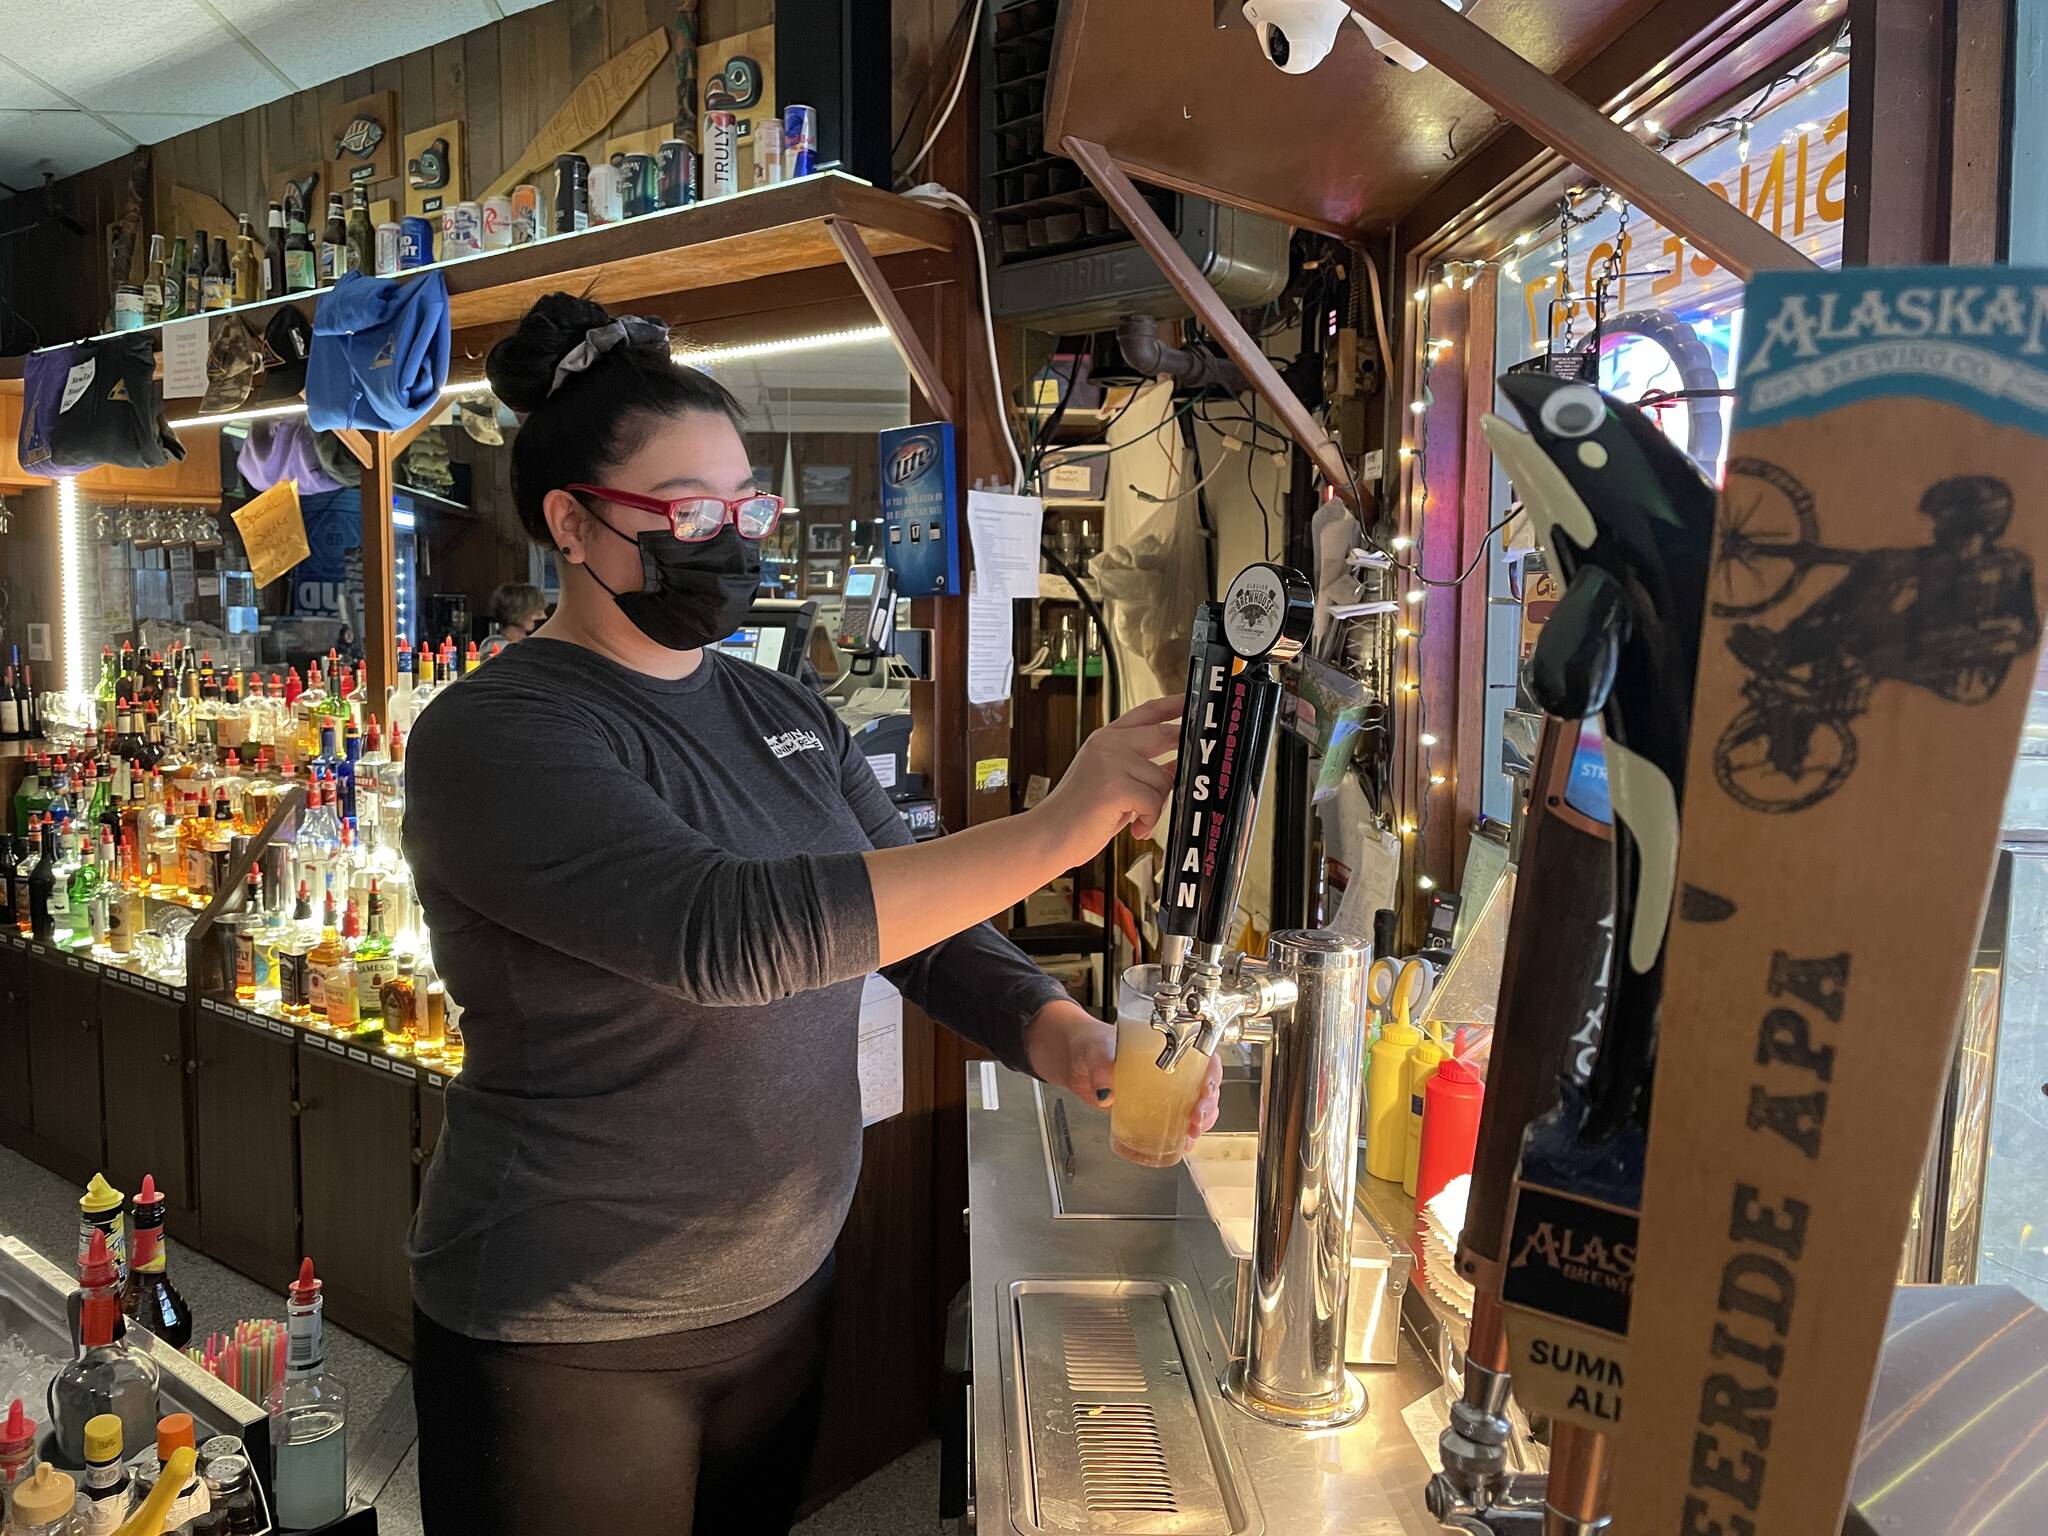 Triangle Club bartender Sam Sims pulls a pint on Nov. 17, 2021 as Juneau recently announced that bars would be able to operate for their full hours under modified mitigation measures. (Michael S. Lockett / Juneau Empire)